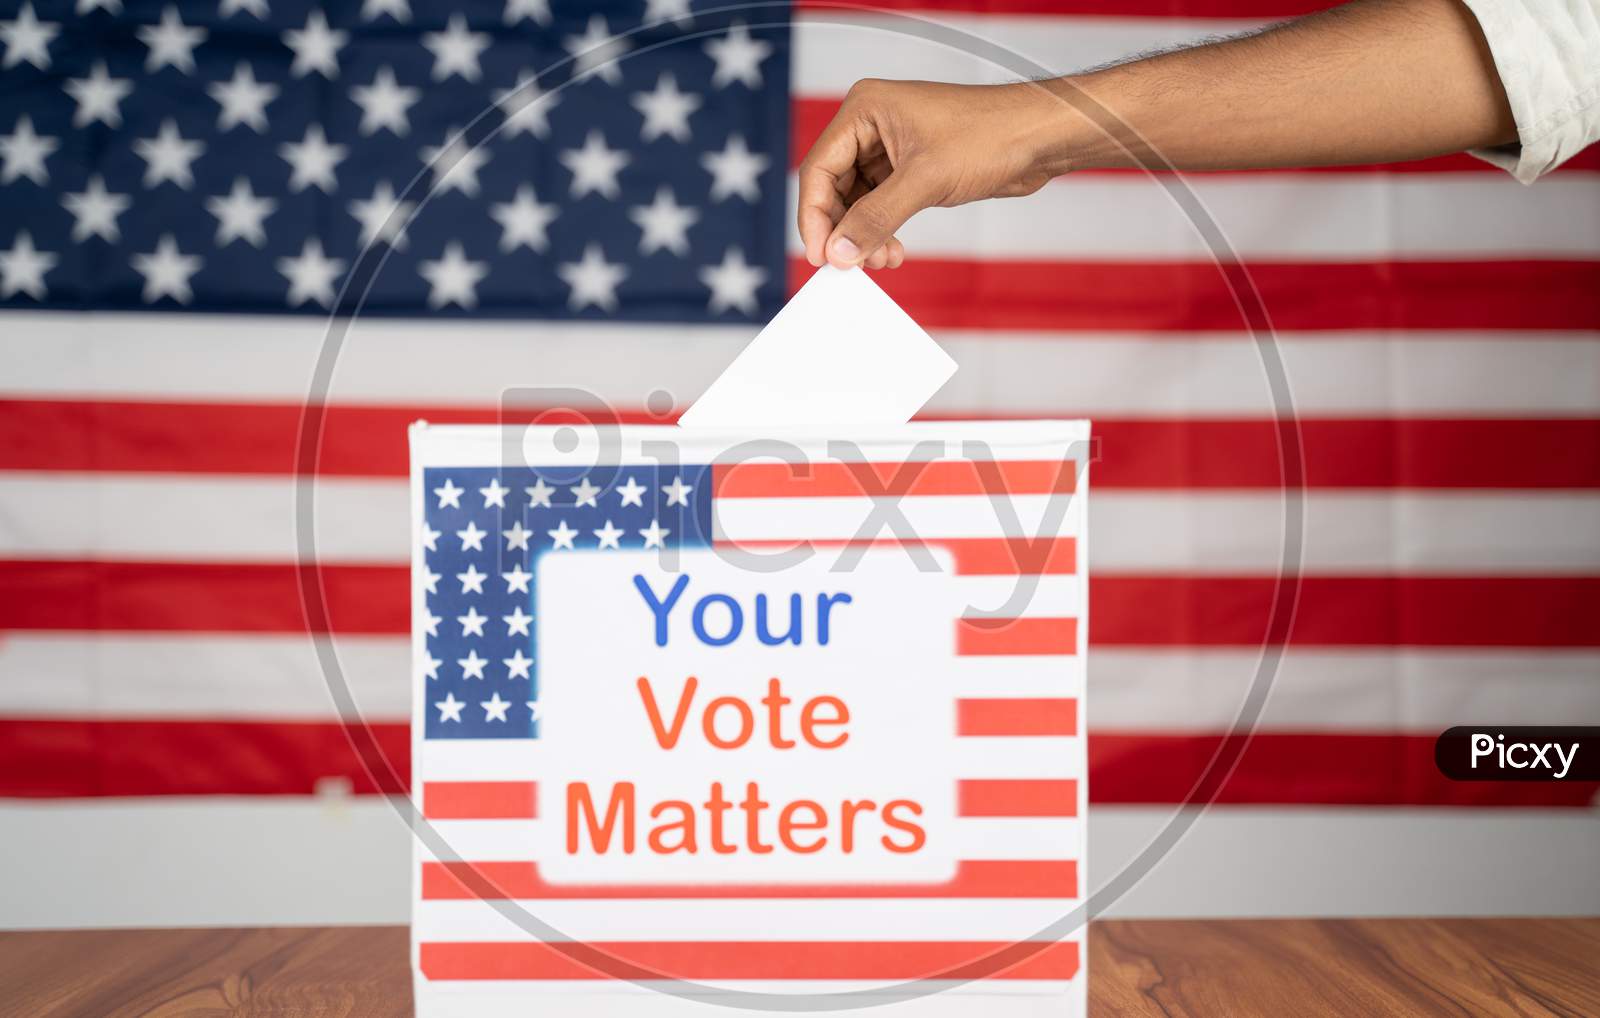 Close Up Of Hands Placing Vote Inside The Ballot Box With Your Vote Matters Printed With Us Flag As Background - Concept Of Voter Rights And Us Election.